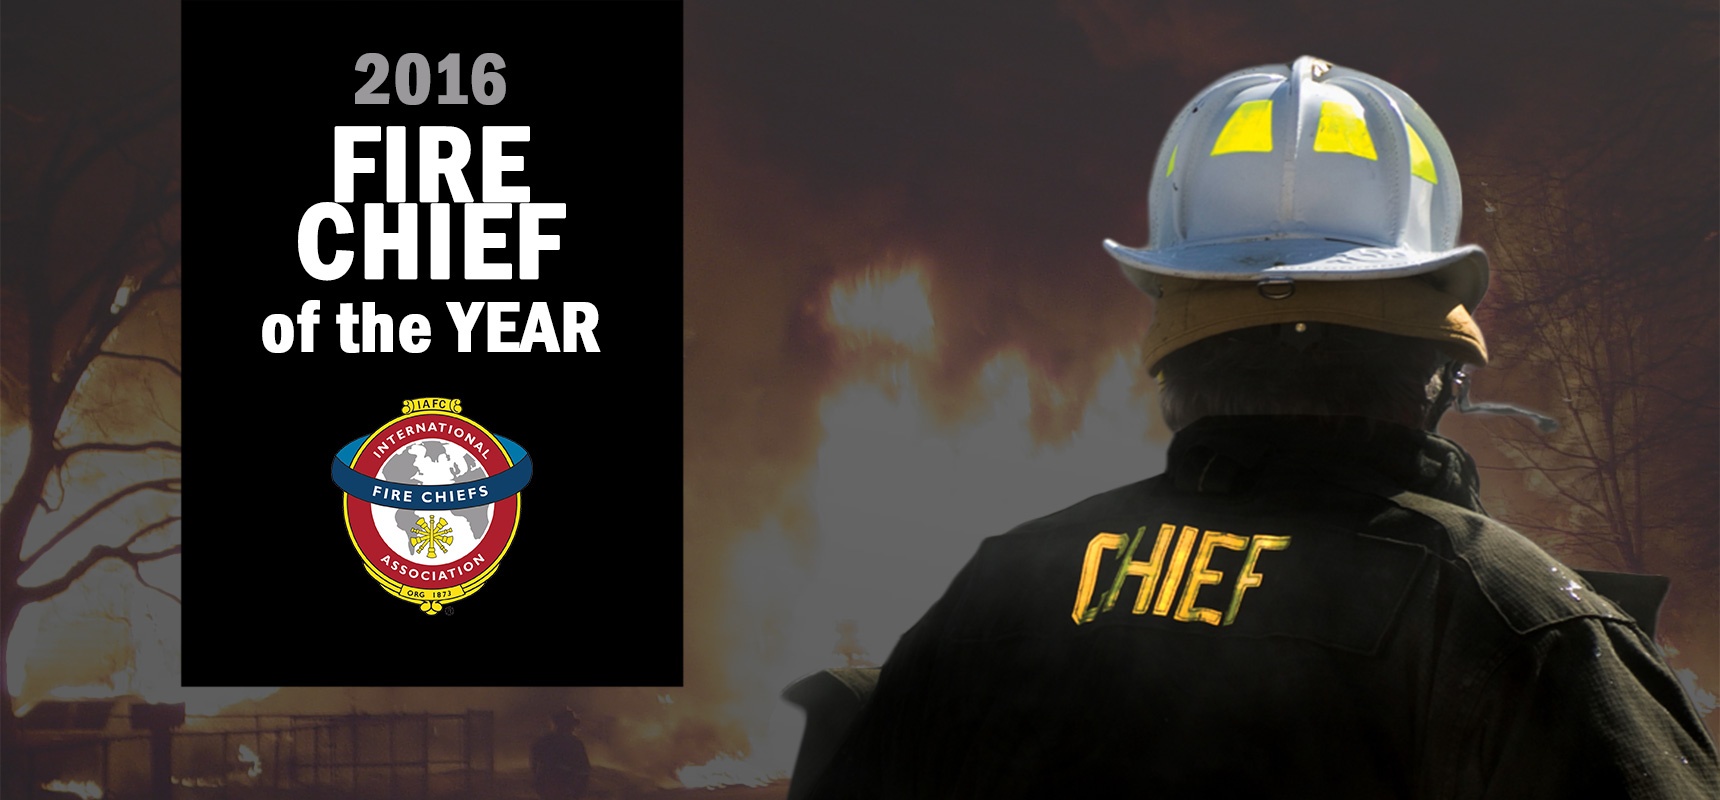 Pierce-Manufacturing-and-the-IAFC-Honor-2016-Career-and-Volunteer-Fire-Chiefs-of-the-Year_Header.jpg